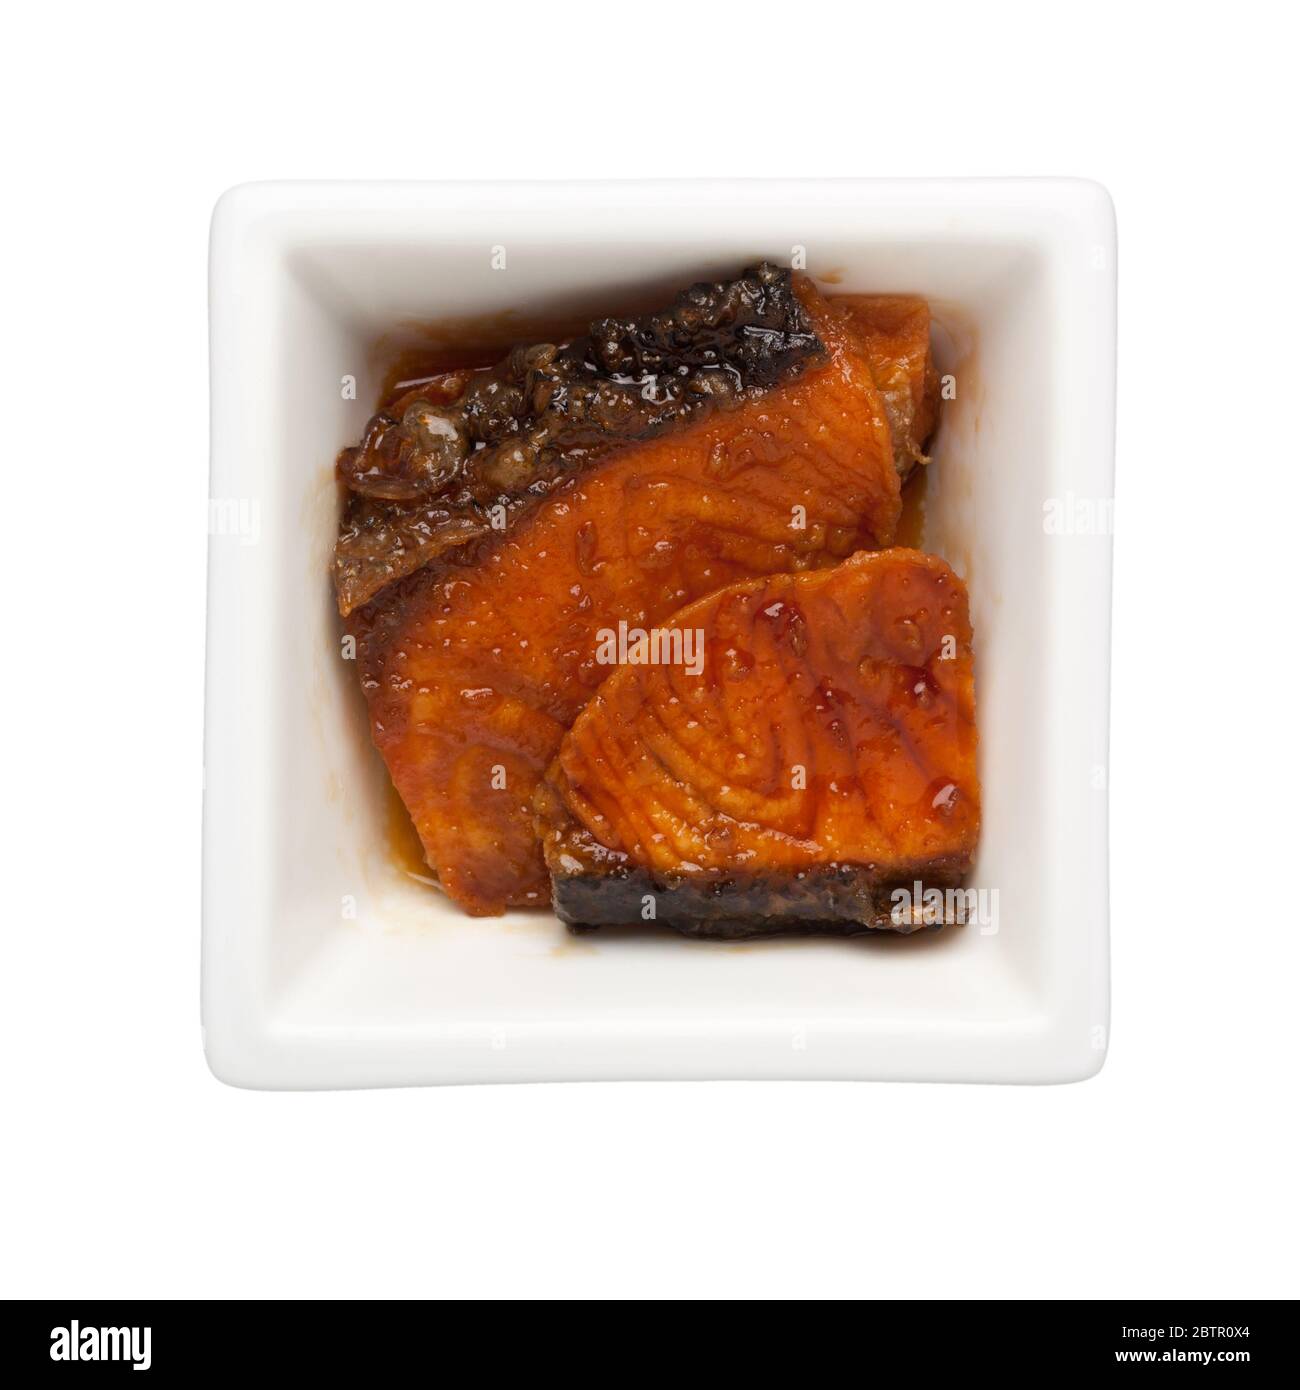 Japanese food - Pan grilled teriyaki salmon fillet in a square bowl isolated on white background Stock Photo